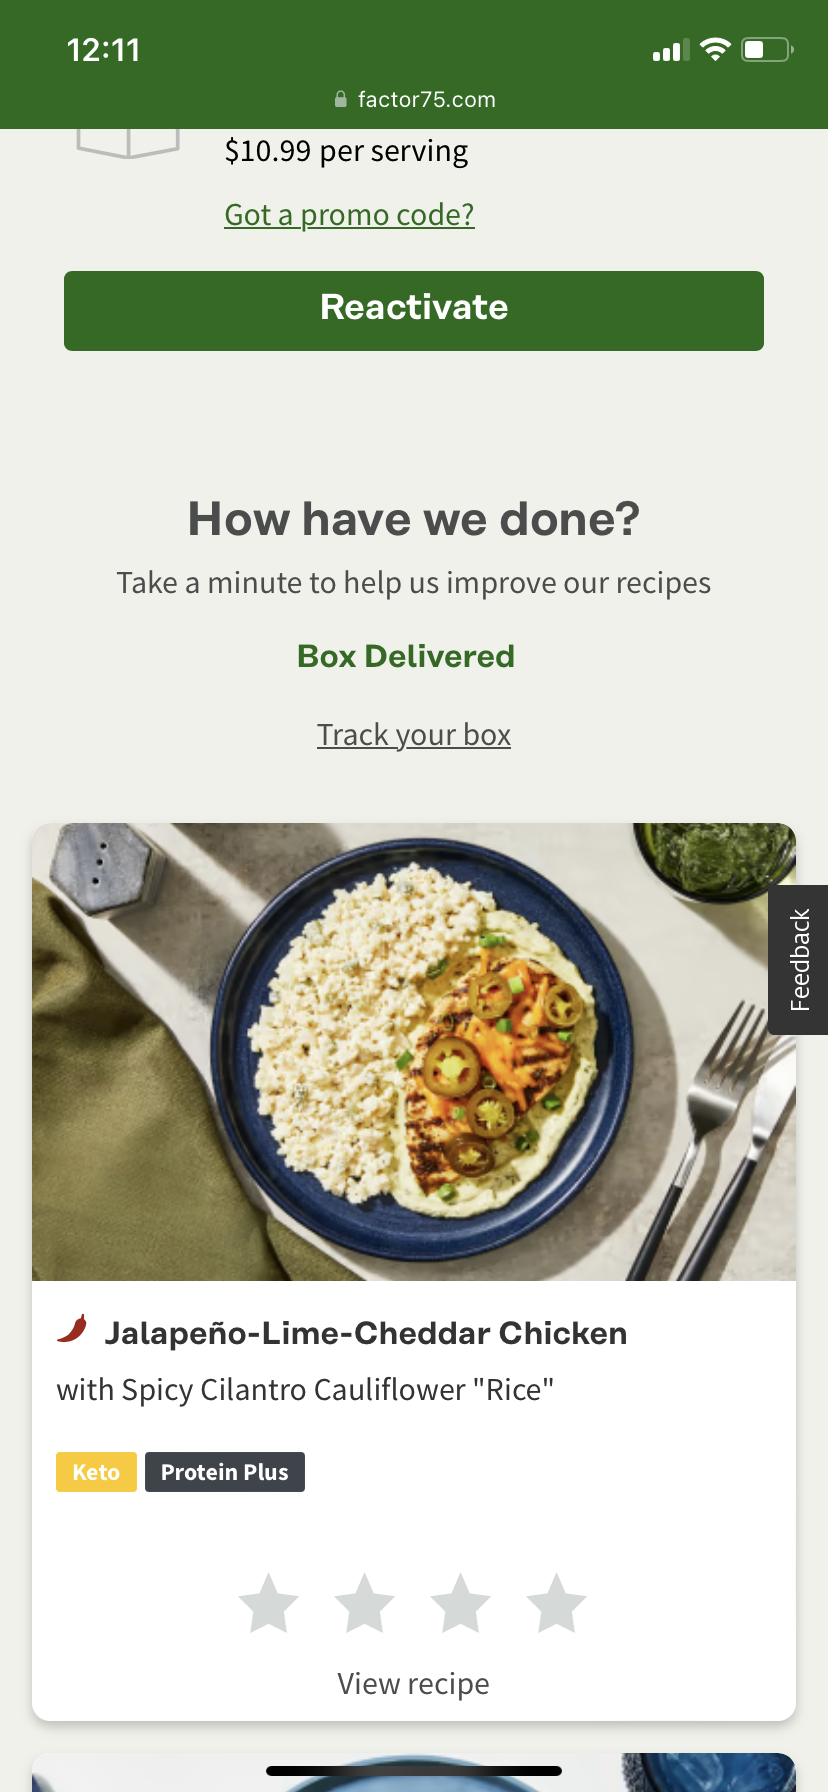 Factor 75 Review: I Tried the Meal-Delivery Service on My Family – SheKnows